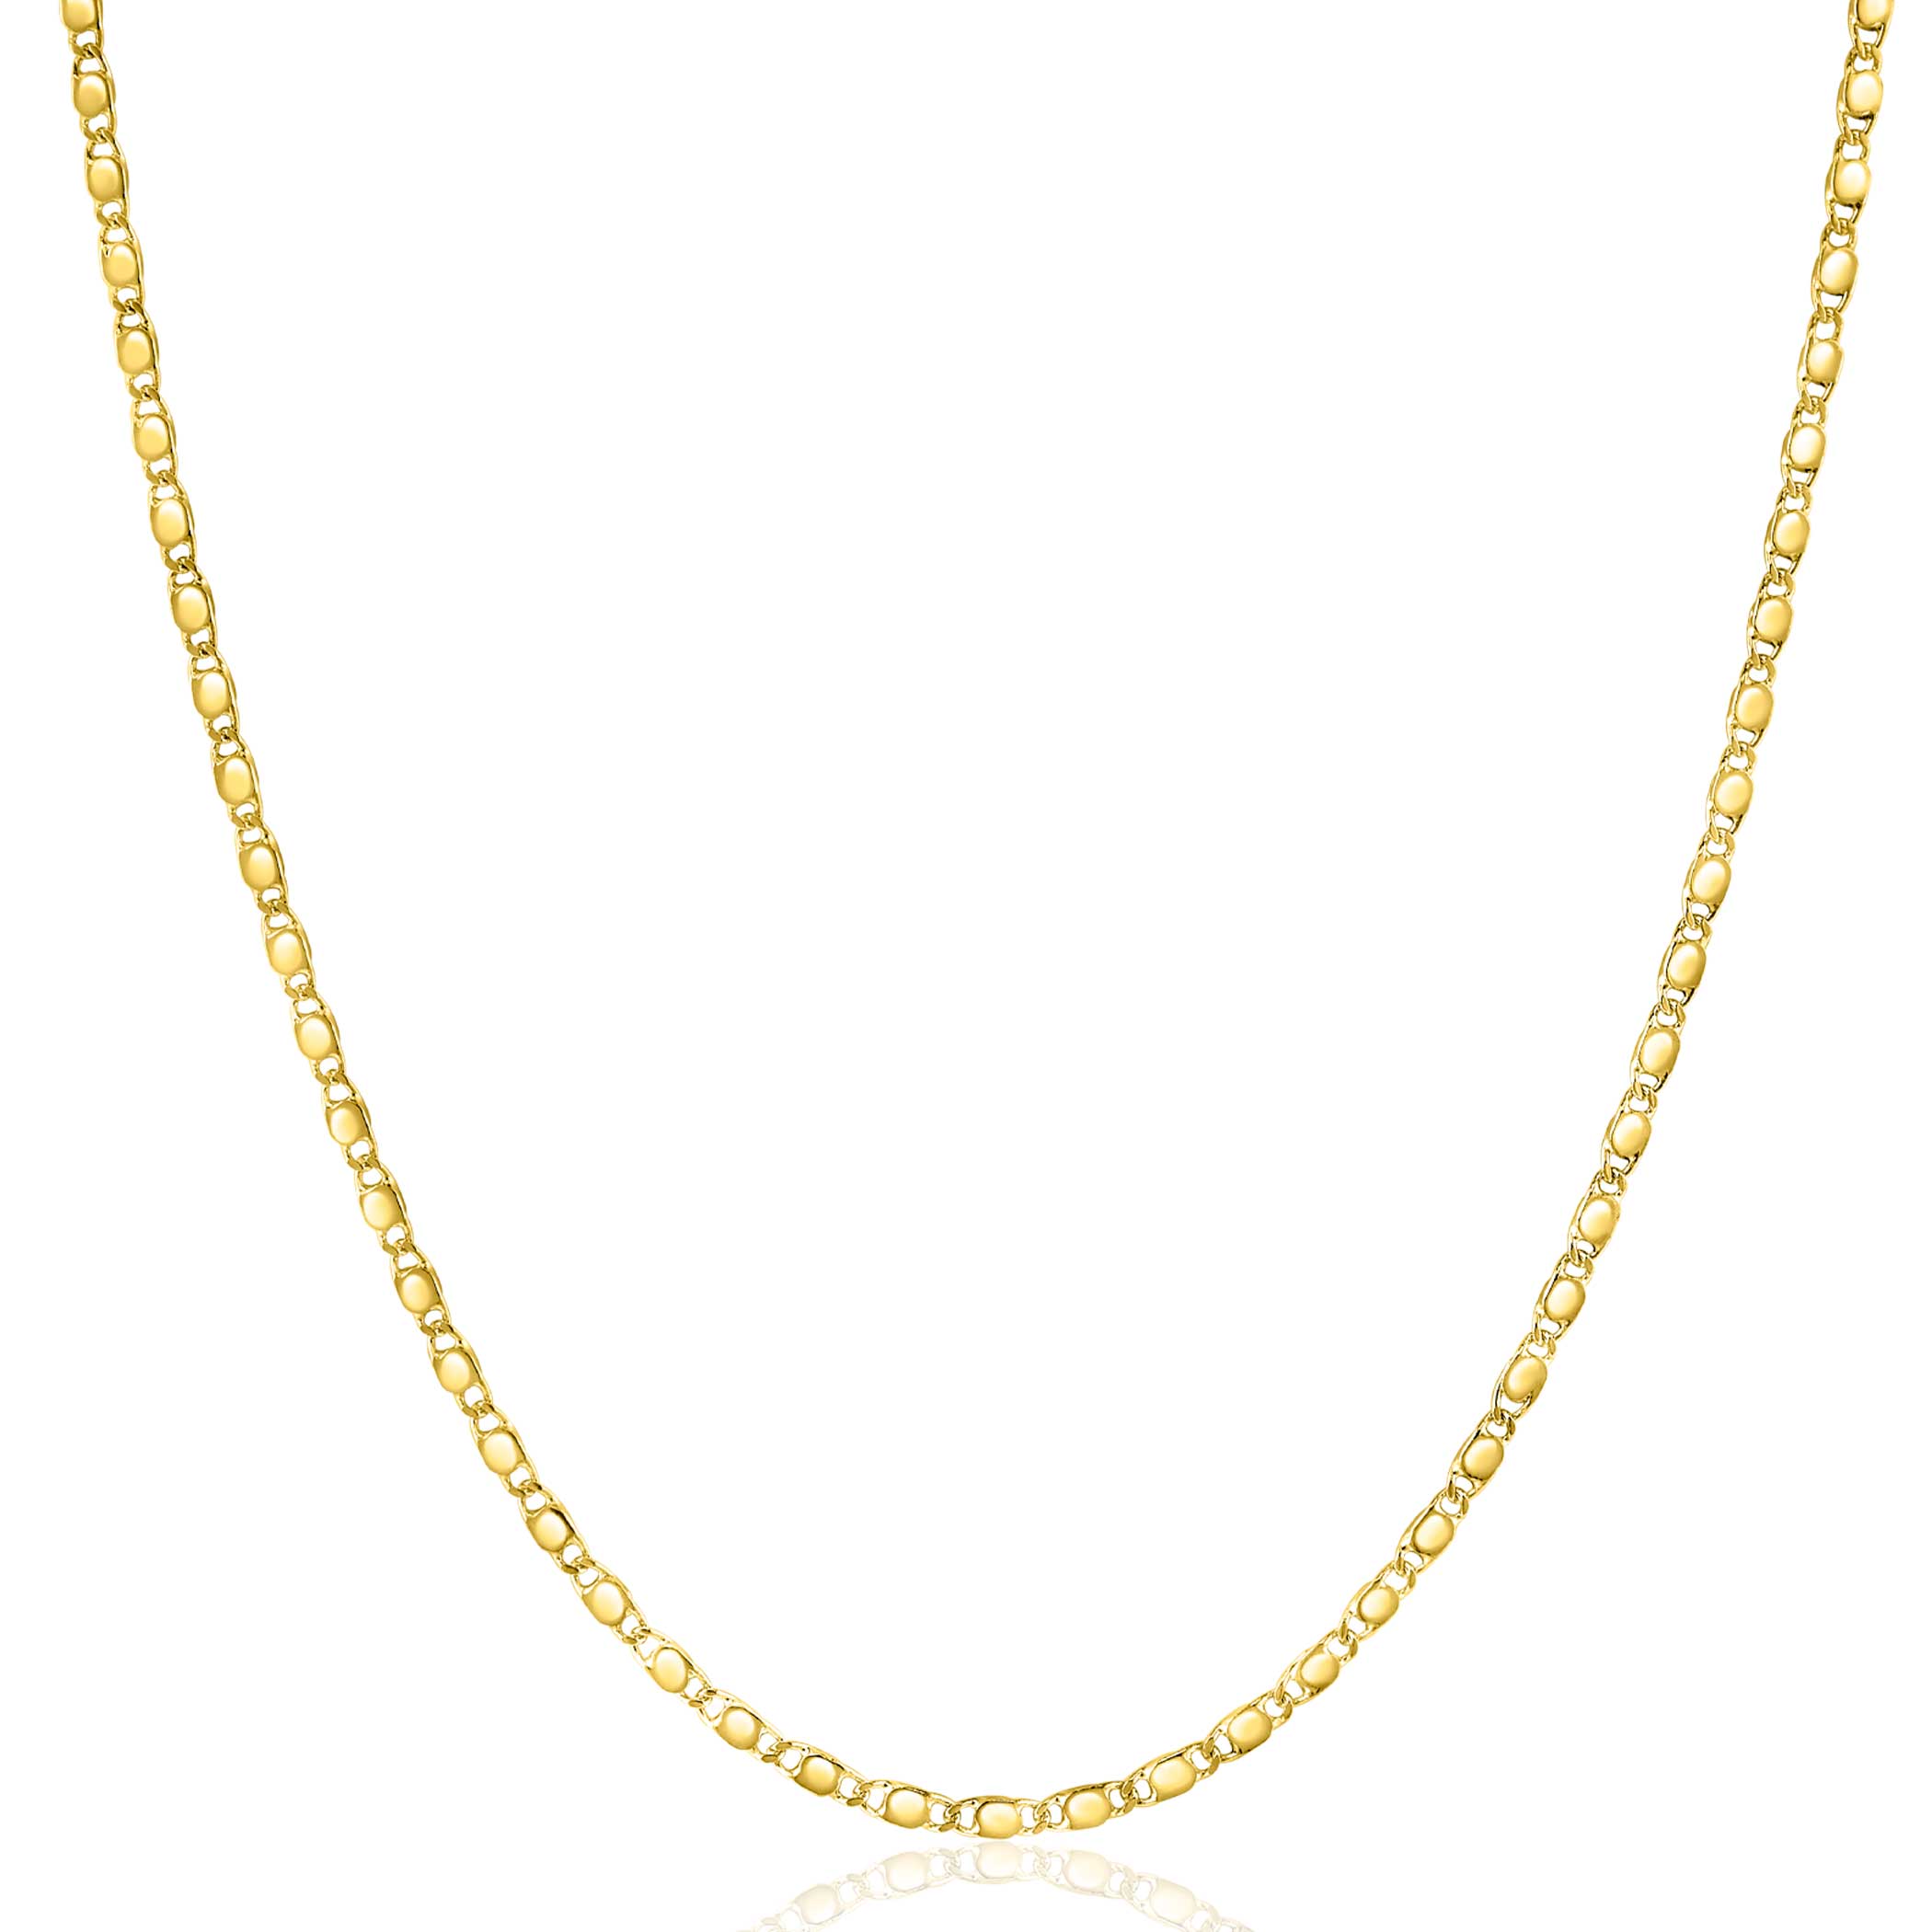 ZINZI Gold 14 karat solid gold chain necklace with shiny fantasy plates, 1.7mm wide, 41-43cm long ZGC497
